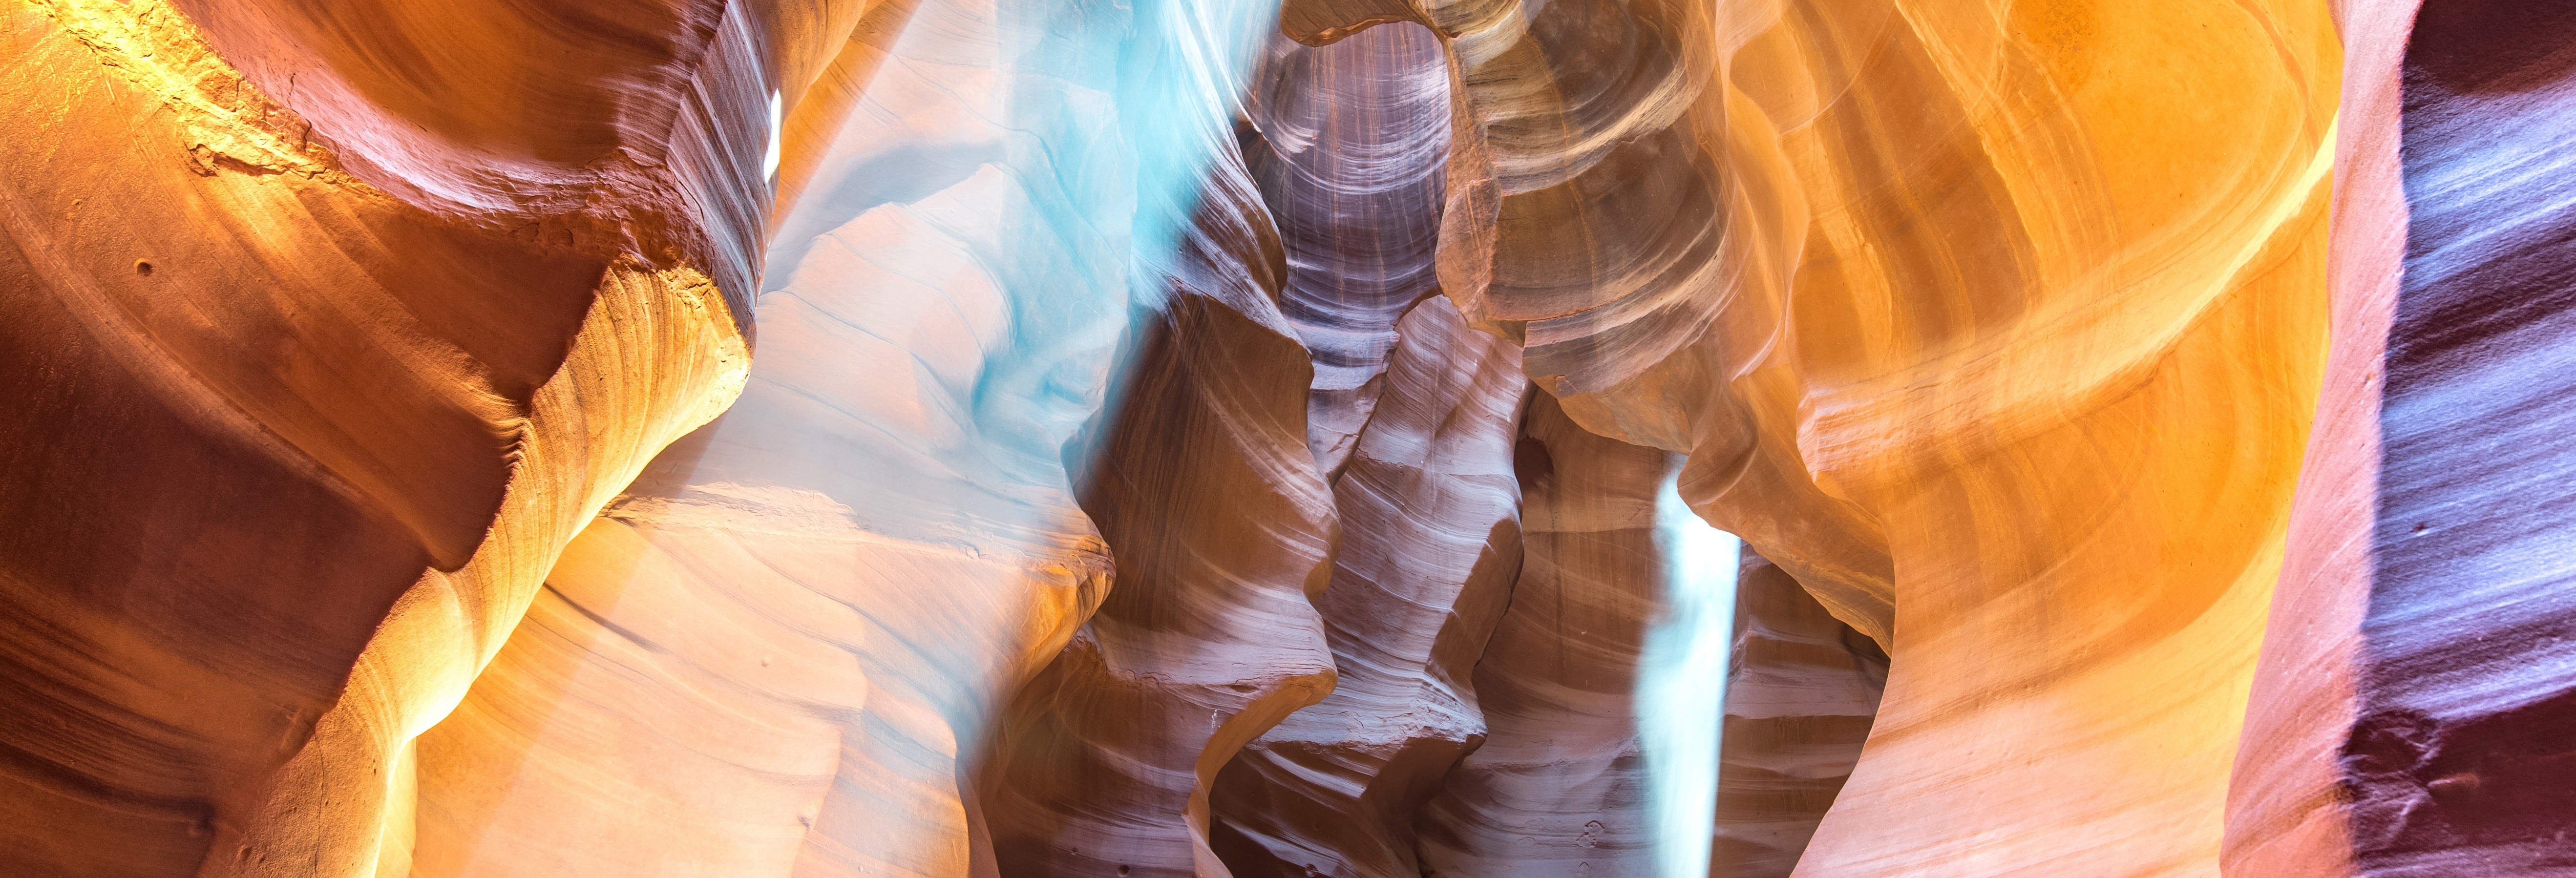 Escursione all'Antelope Canyon